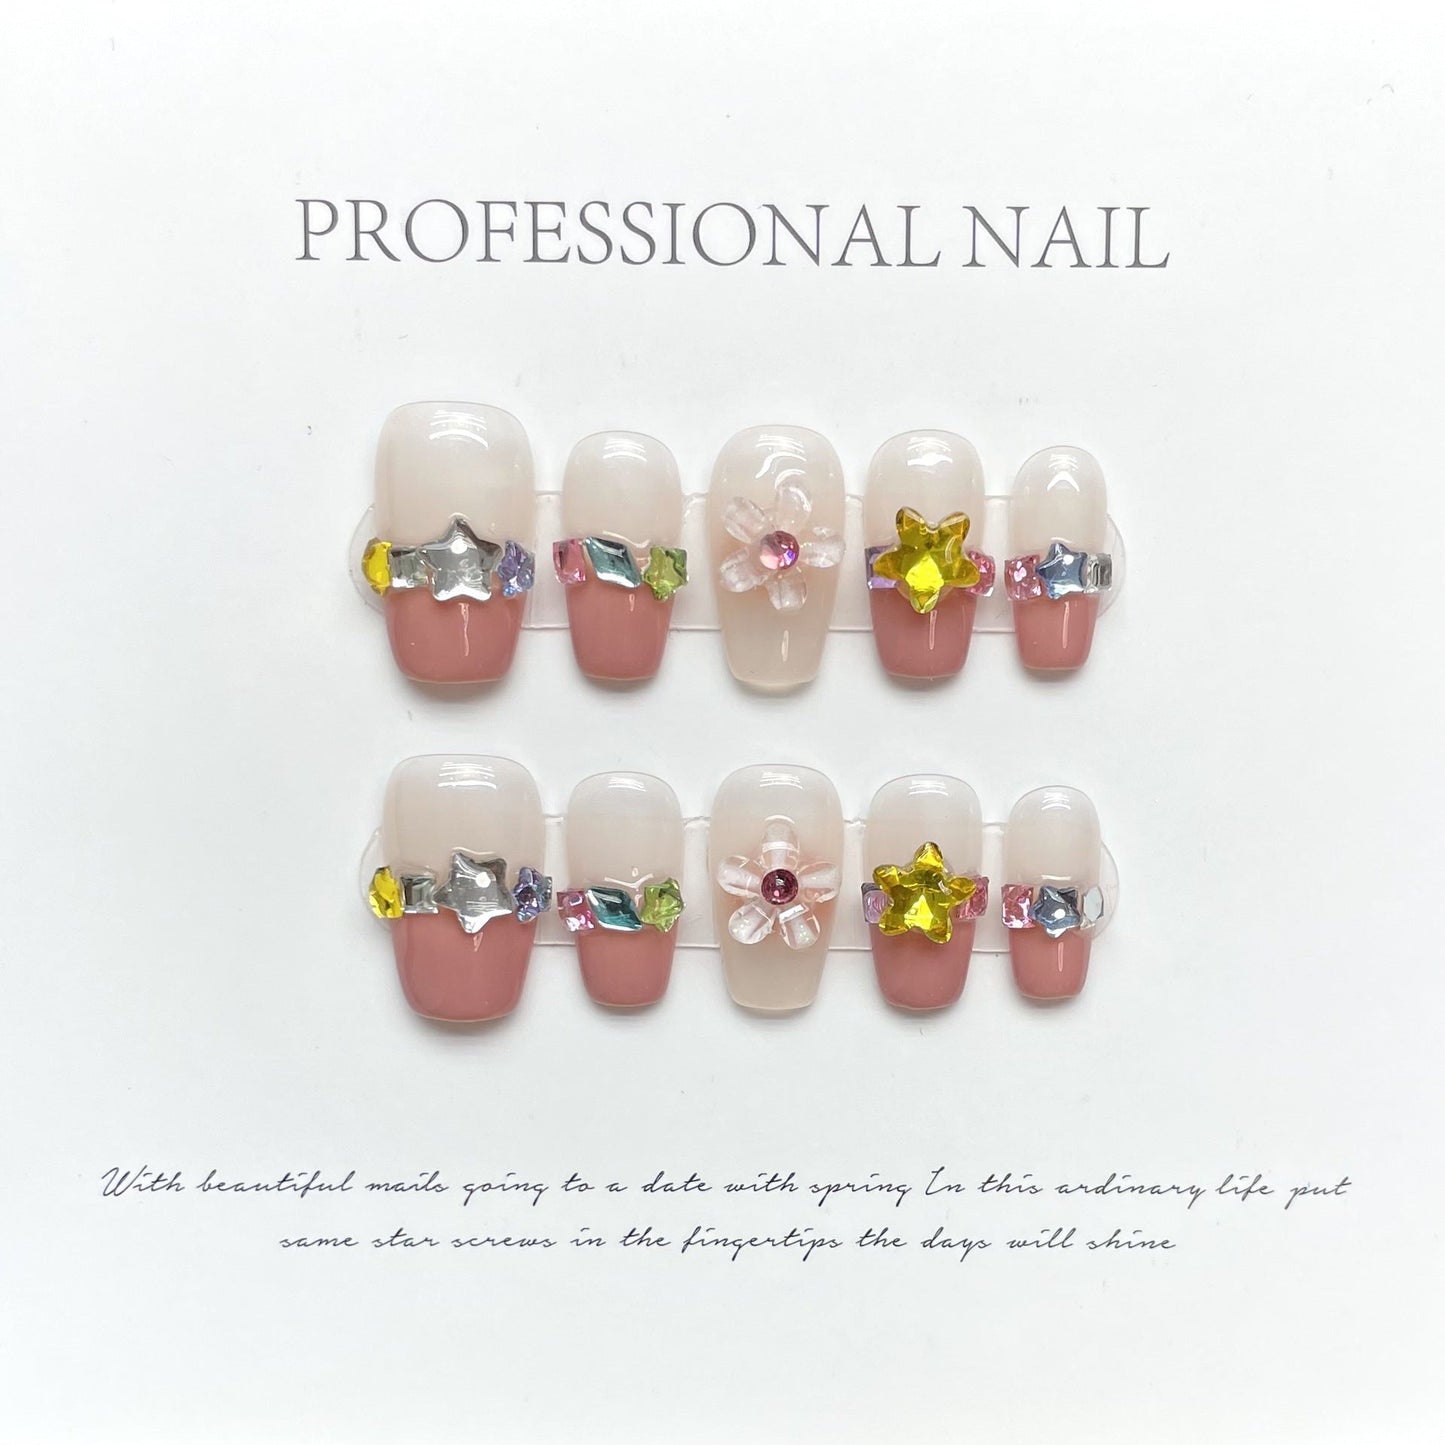 1028 Flowers style style press on nails 100% handmade false nails pink nude color